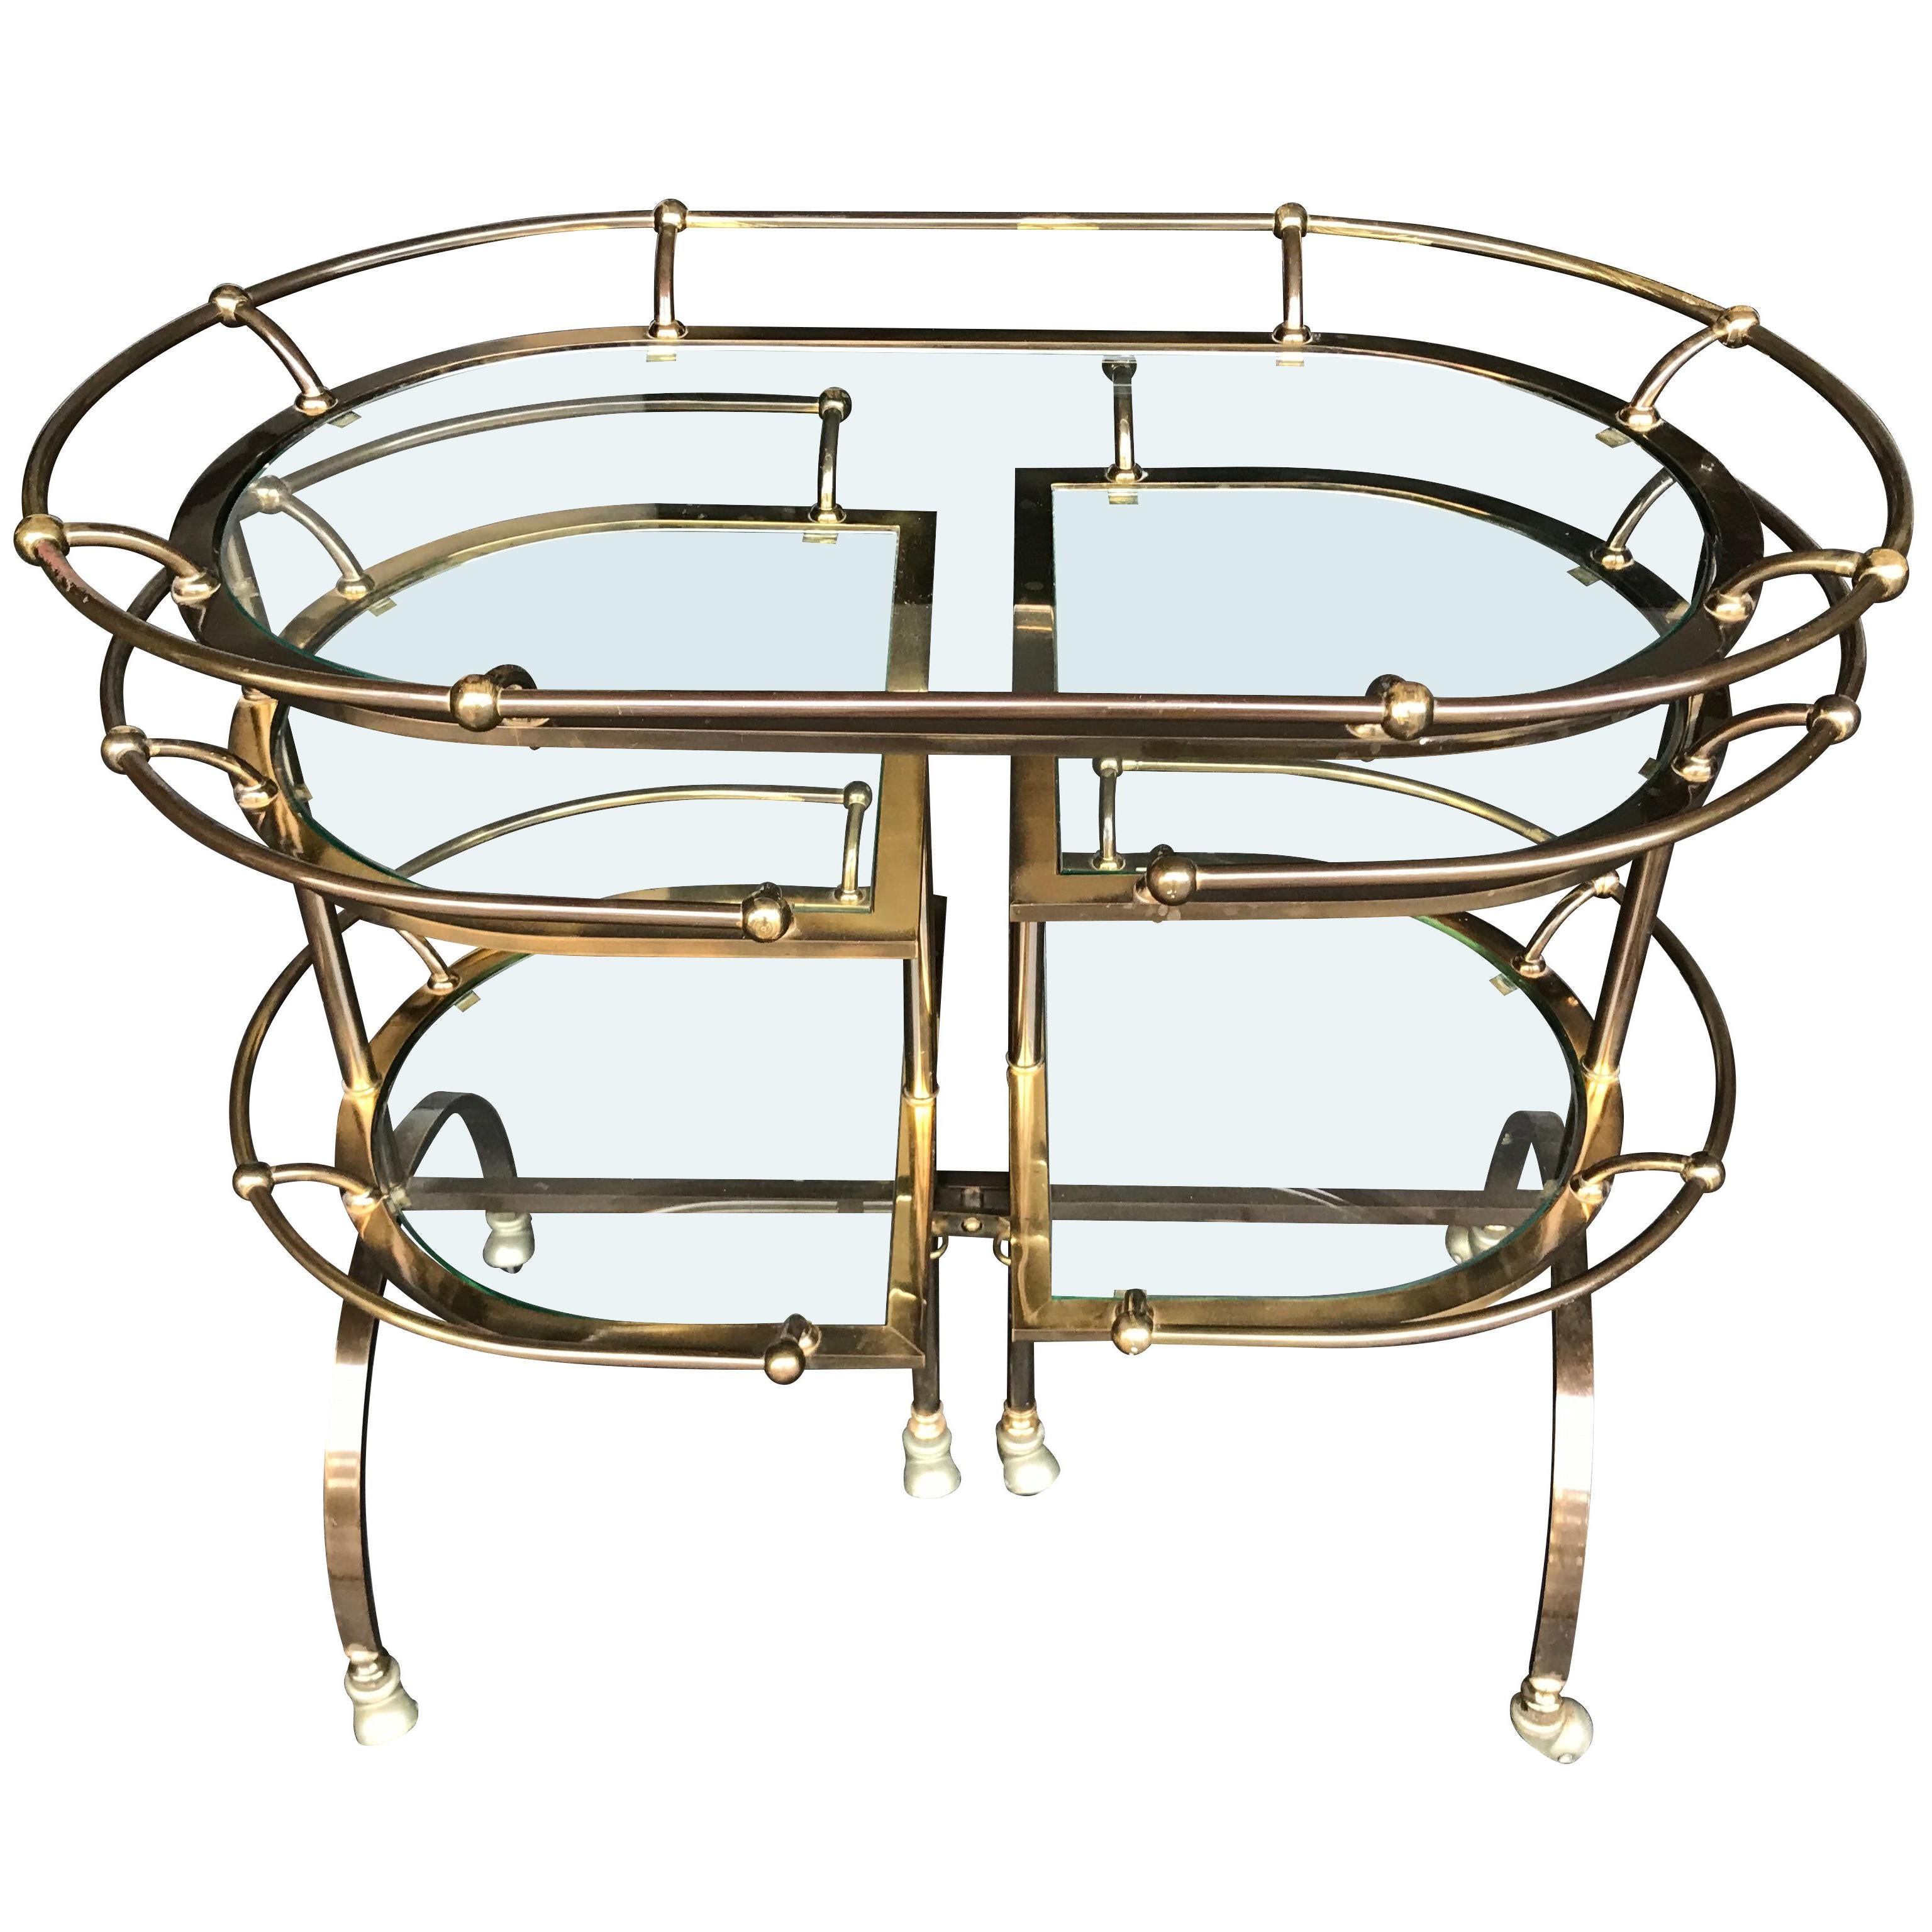 Unique Gilt Metal Bar Trolley with Swing Out Shelves